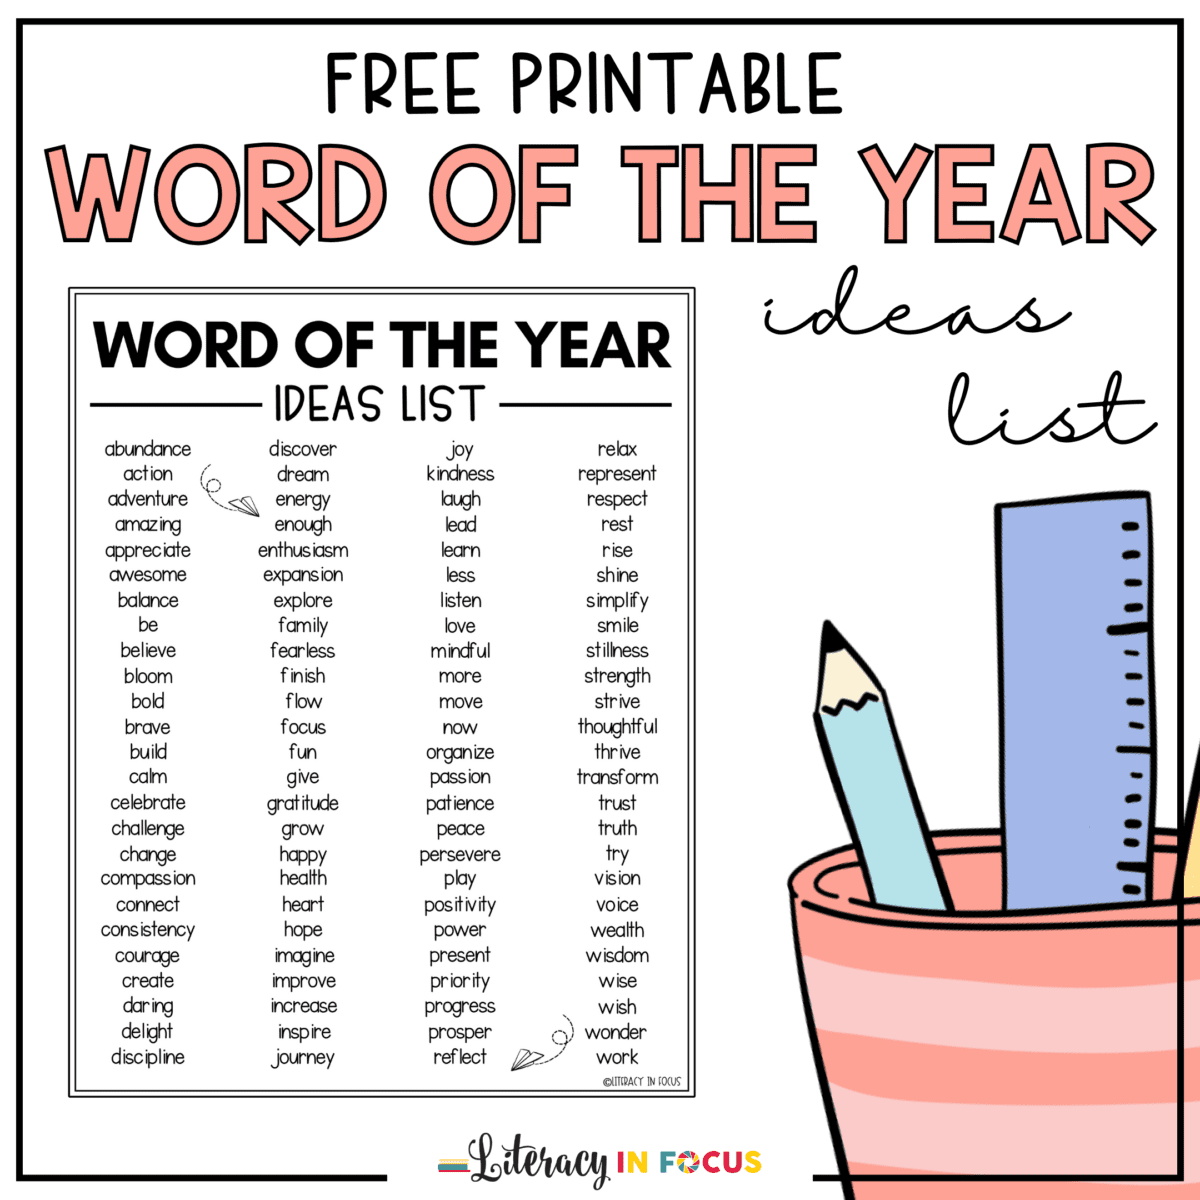 Free Printable Word of the Year List